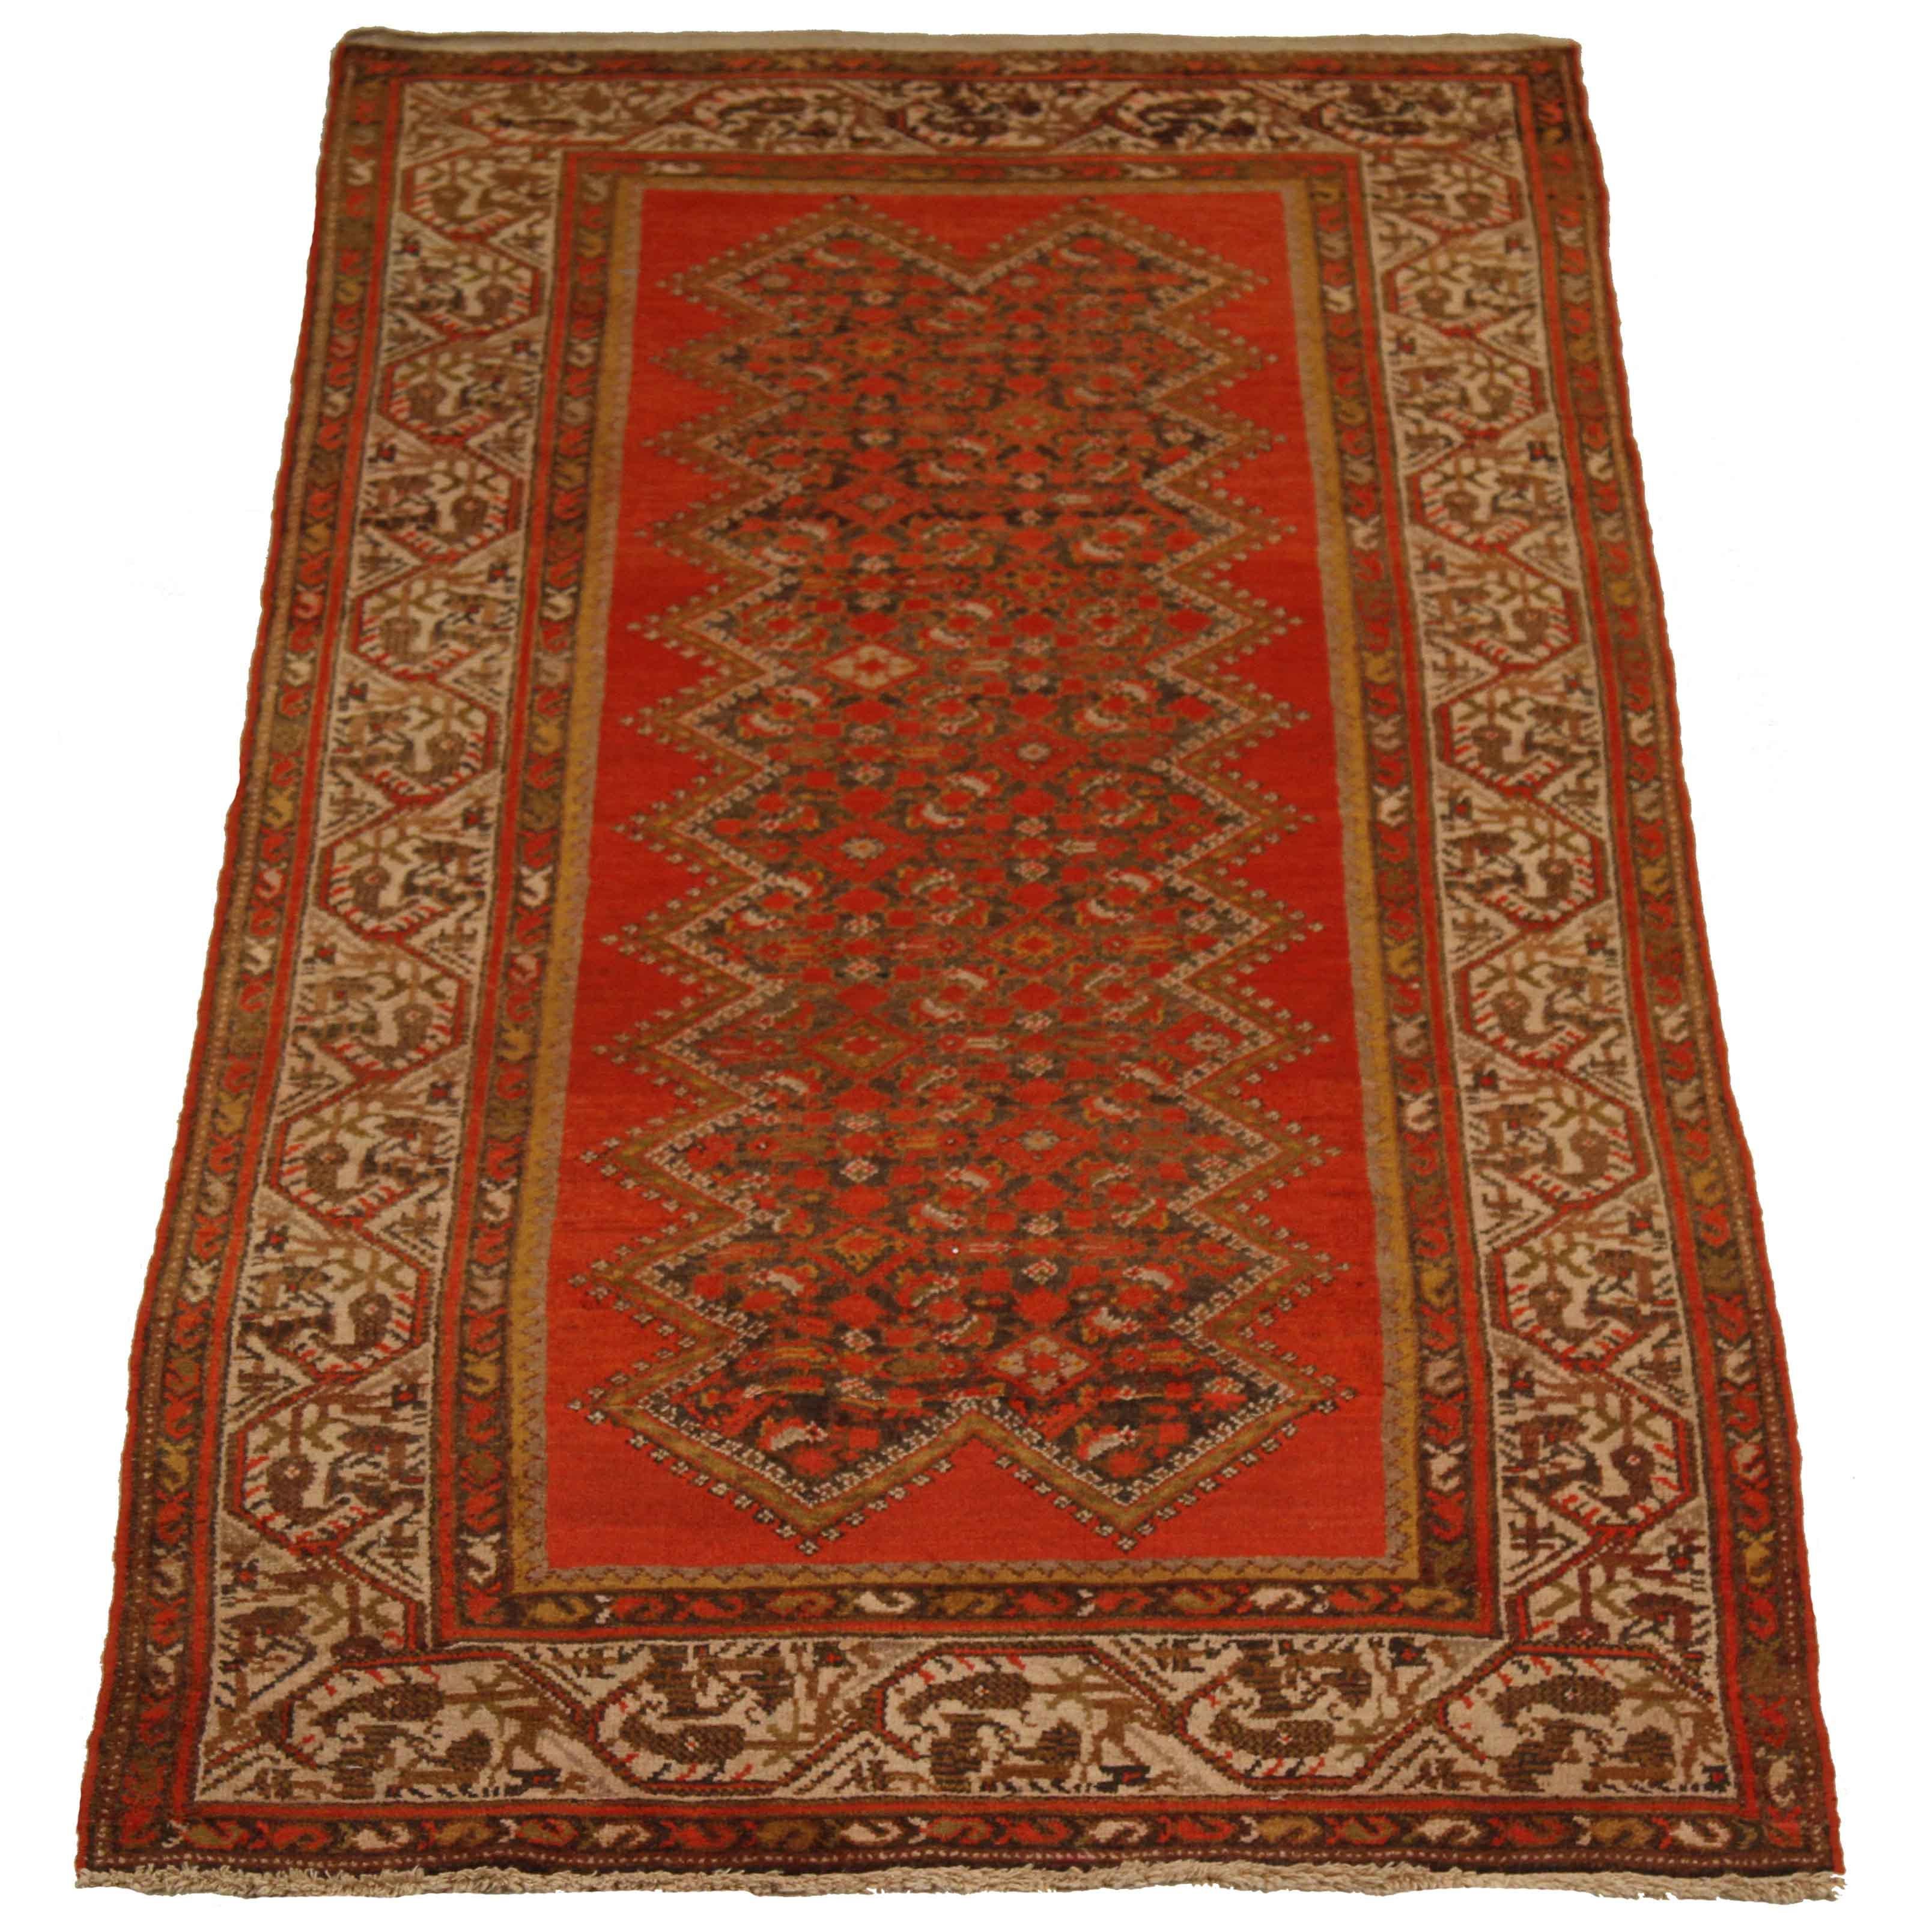 Made of fine wool and handwoven using techniques mastered by Malayer weavers, this antique Persian rug showcases a wonderful fusion of nature-inspired patterns and geometric details. It’s colored in deep red, brown, ivory and yellow which speaks the